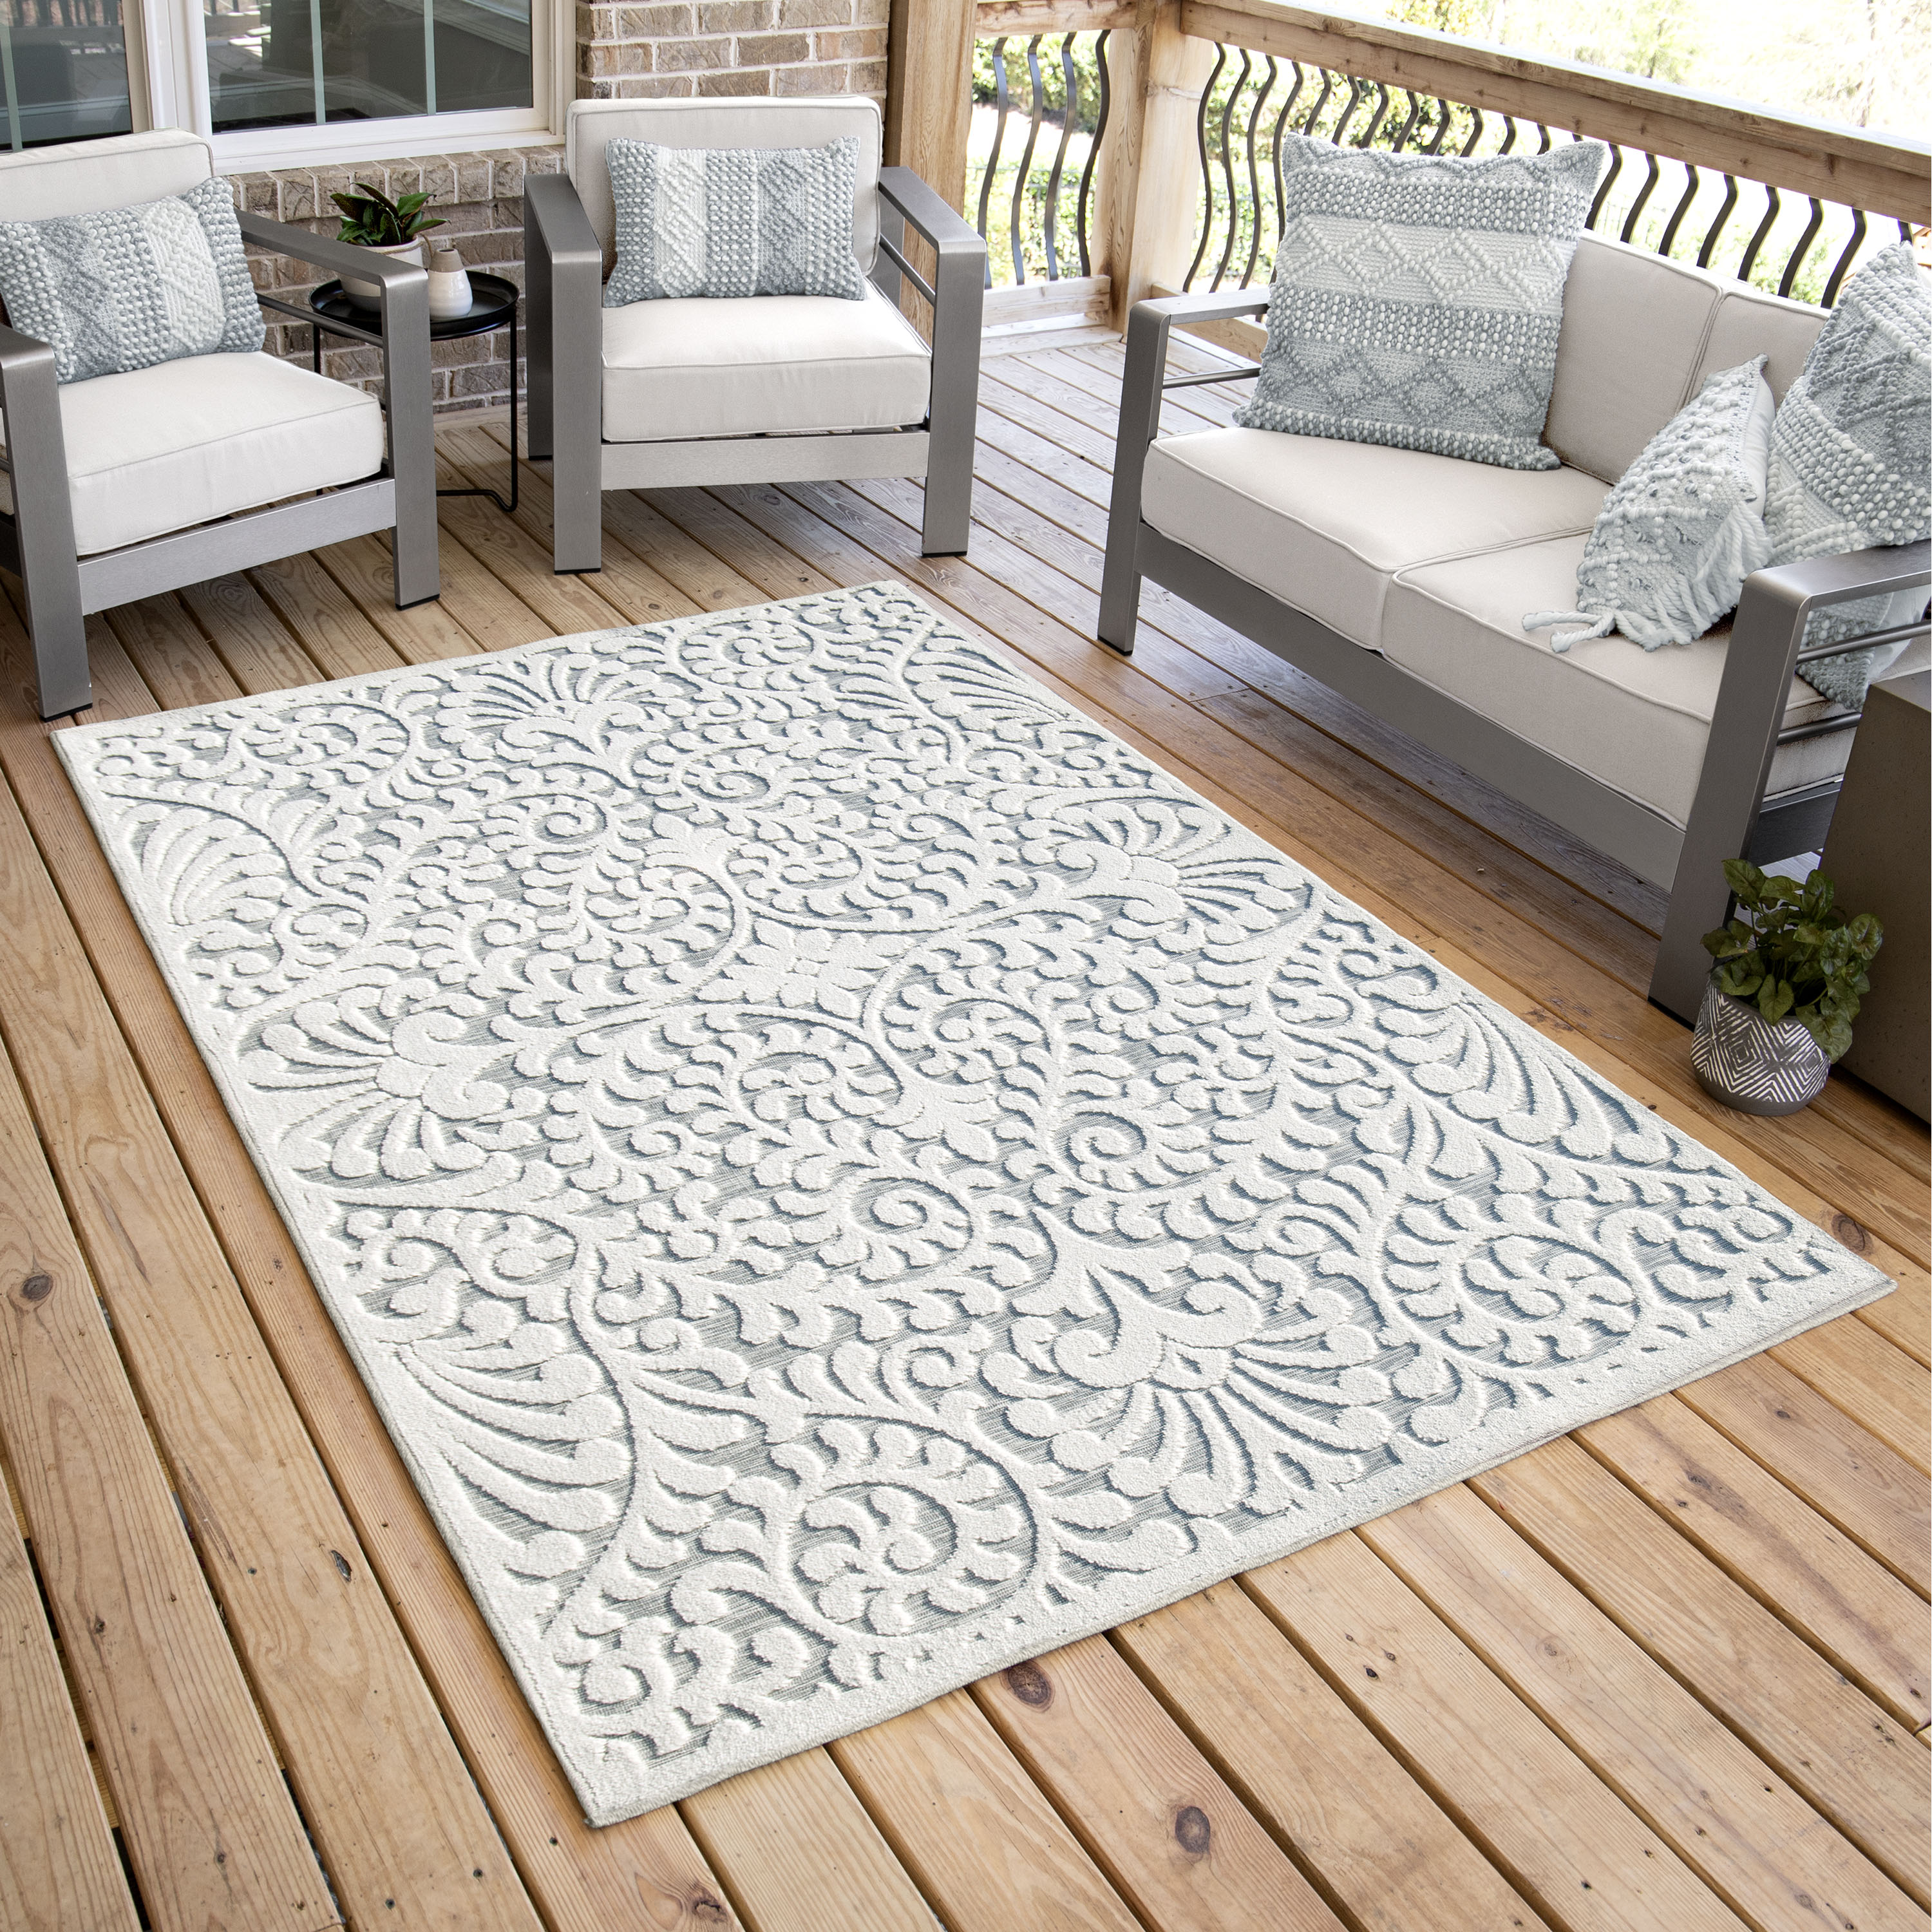 Orian Rugs My Texas House Bluebonnets 5 x 8 Natural/Blue Indoor/Outdoor  Damask Farmhouse/Cottage Area Rug